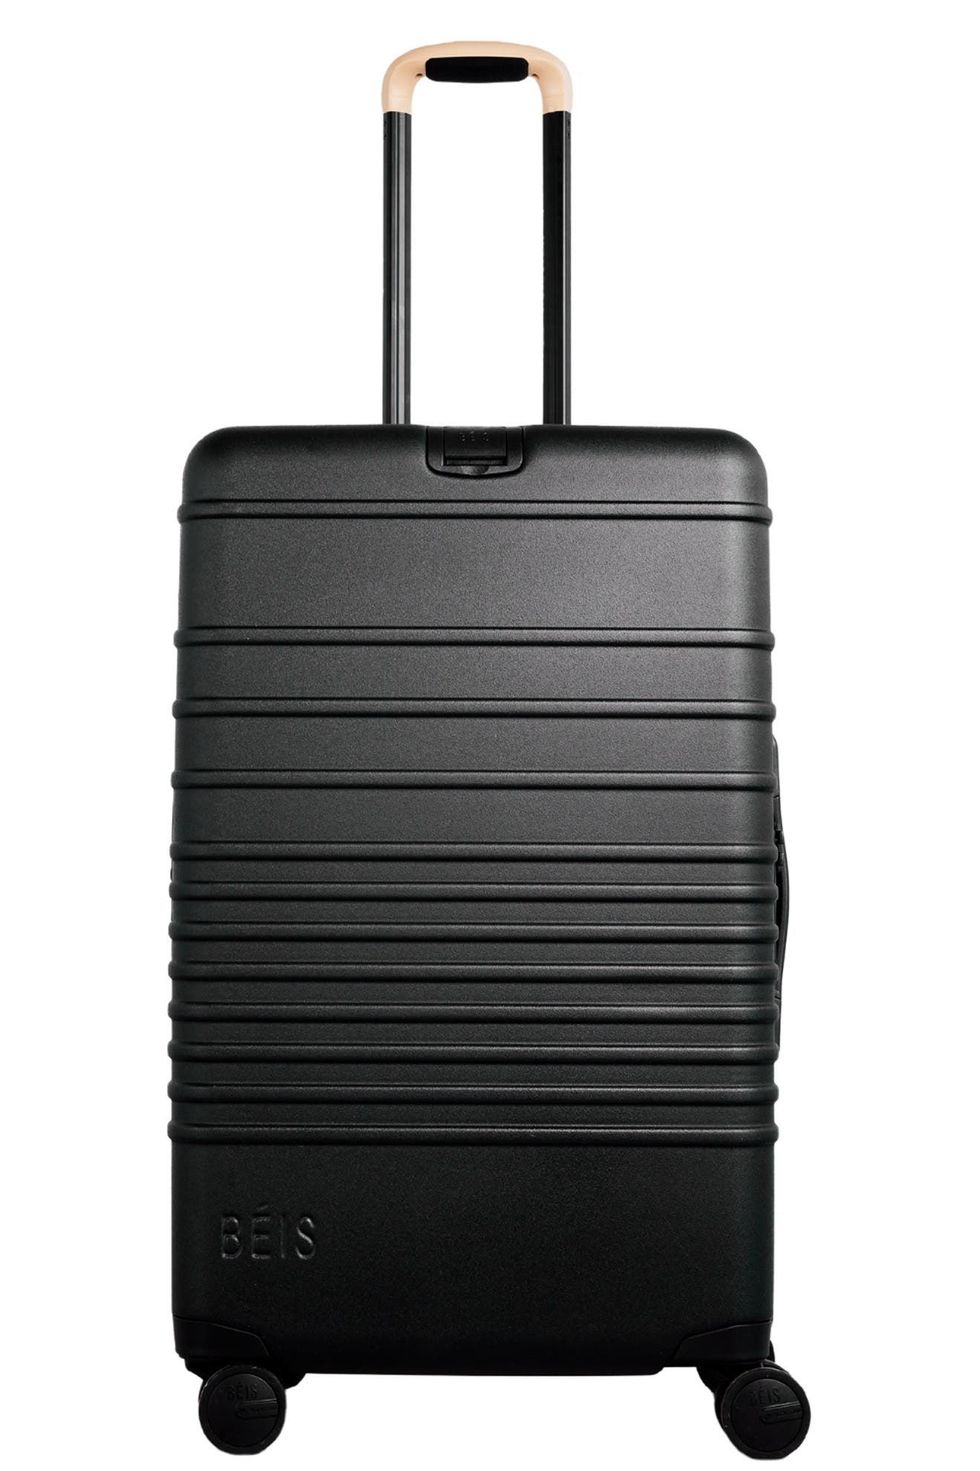 The 29-Inch Check-In Roller Suitcase